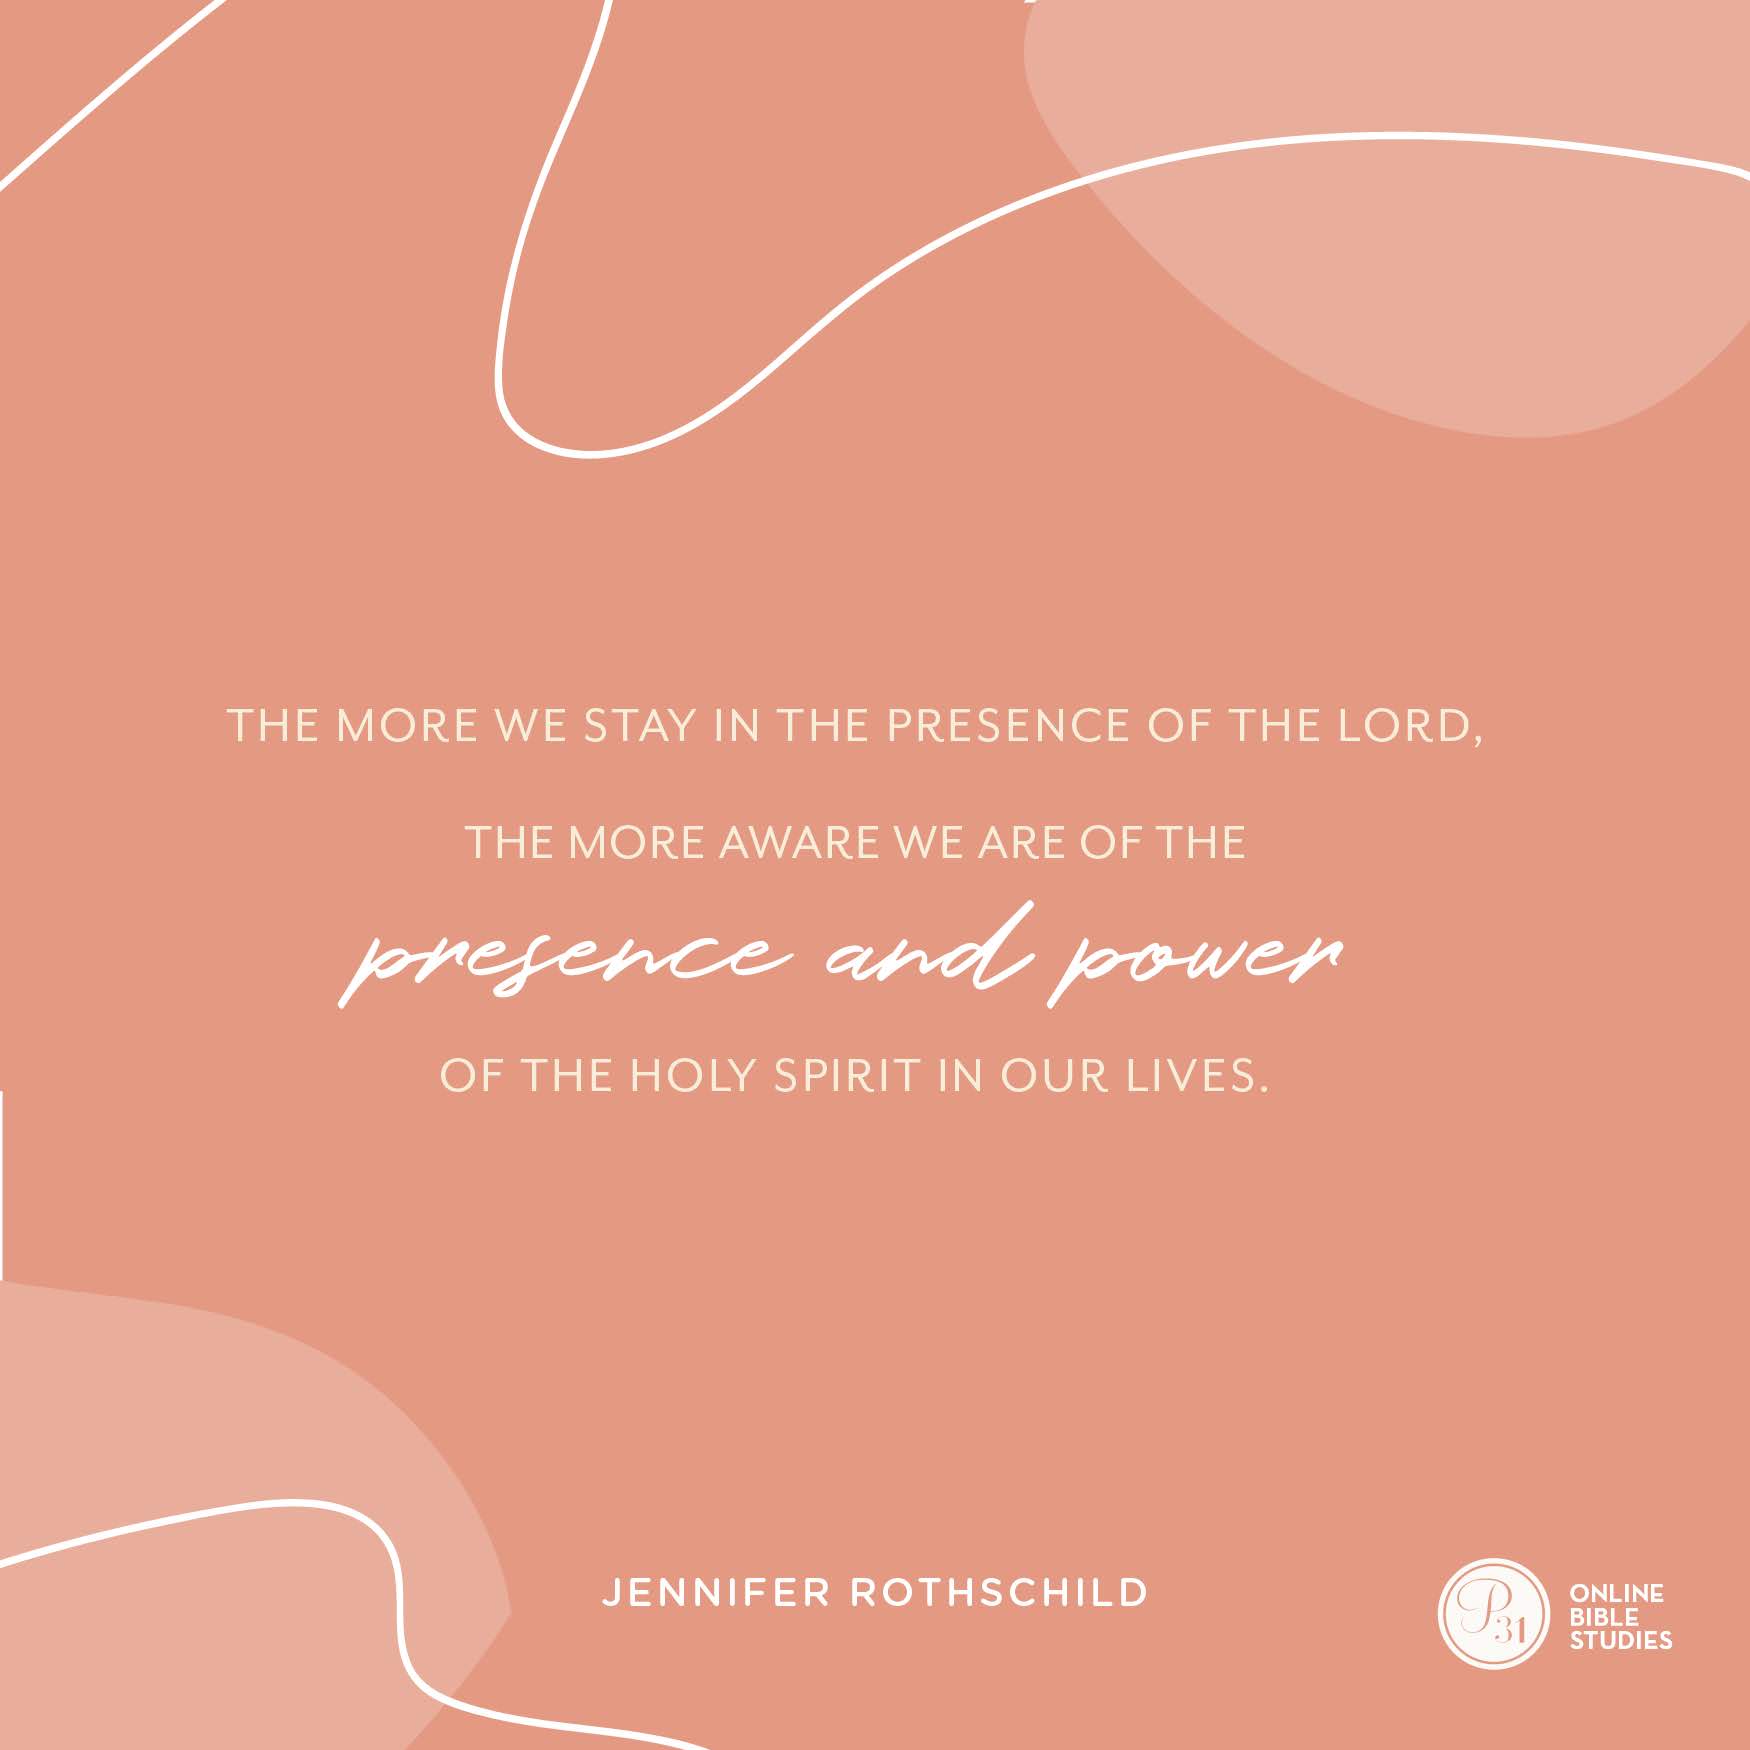 “The more we stay in the presence of the Lord... the more aware we are of the presence and power of the Holy Spirit in our lives.” - Jennifer Rothschild  #Psalm23Study | Proverbs 31 Online Bible Studies Week 5 #P31OBS